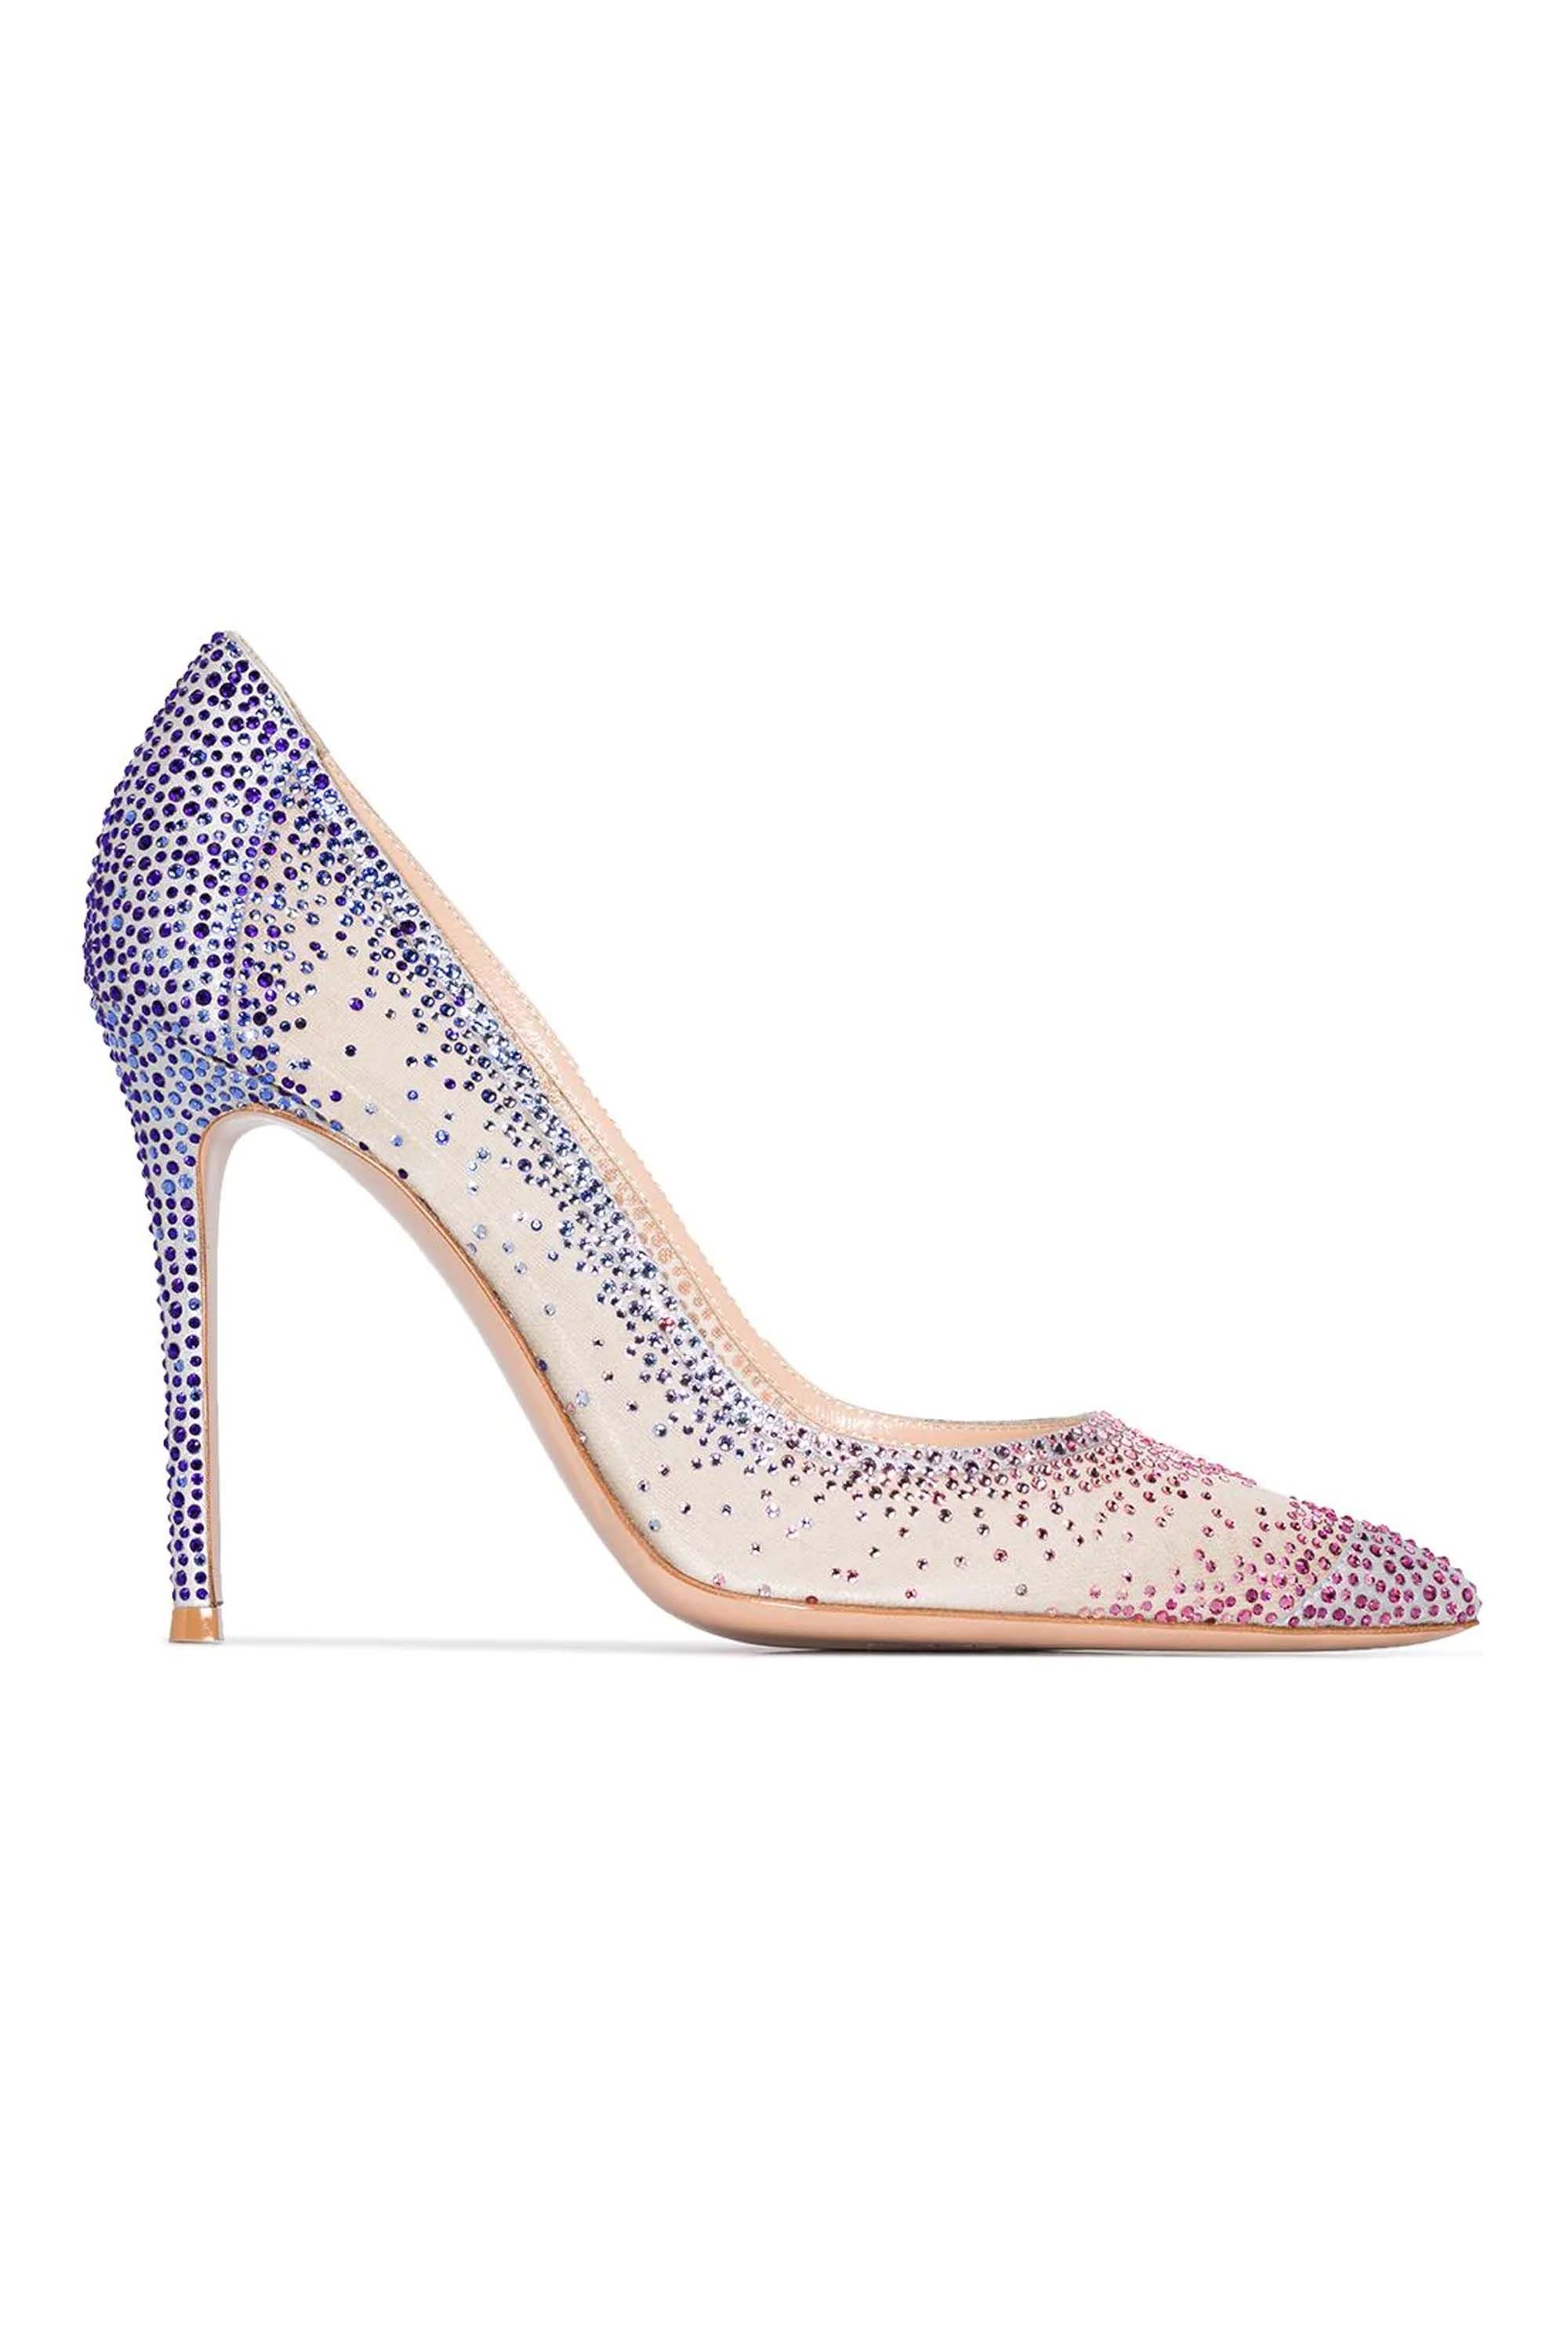 30 Cinderella shoes that are the most beautiful shoes hands down!